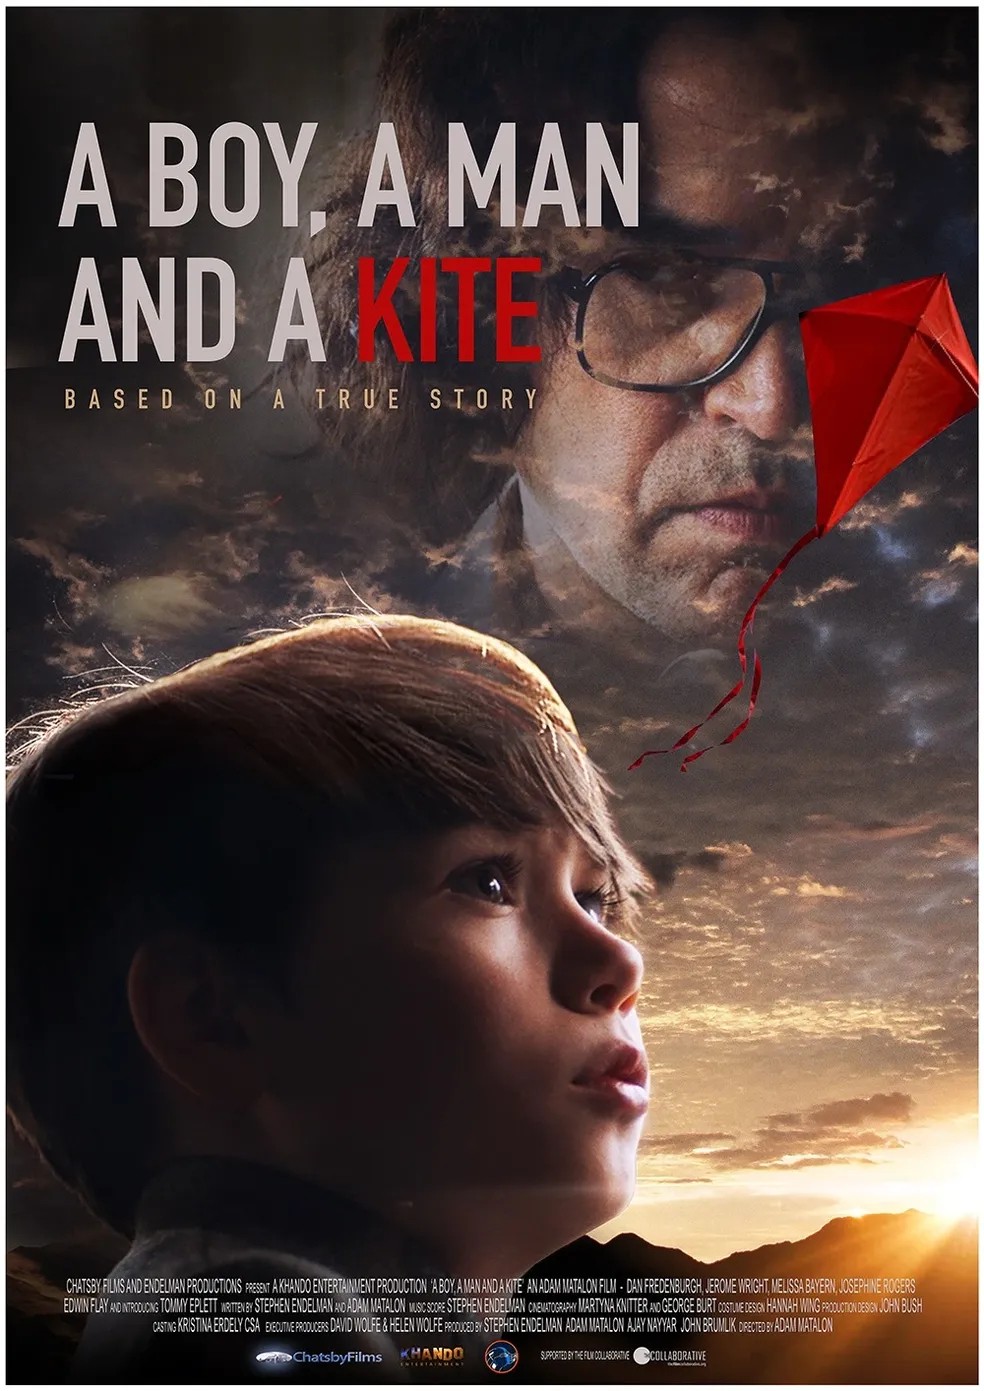 Extra Large Movie Poster Image for A Boy, a Man and a Kite